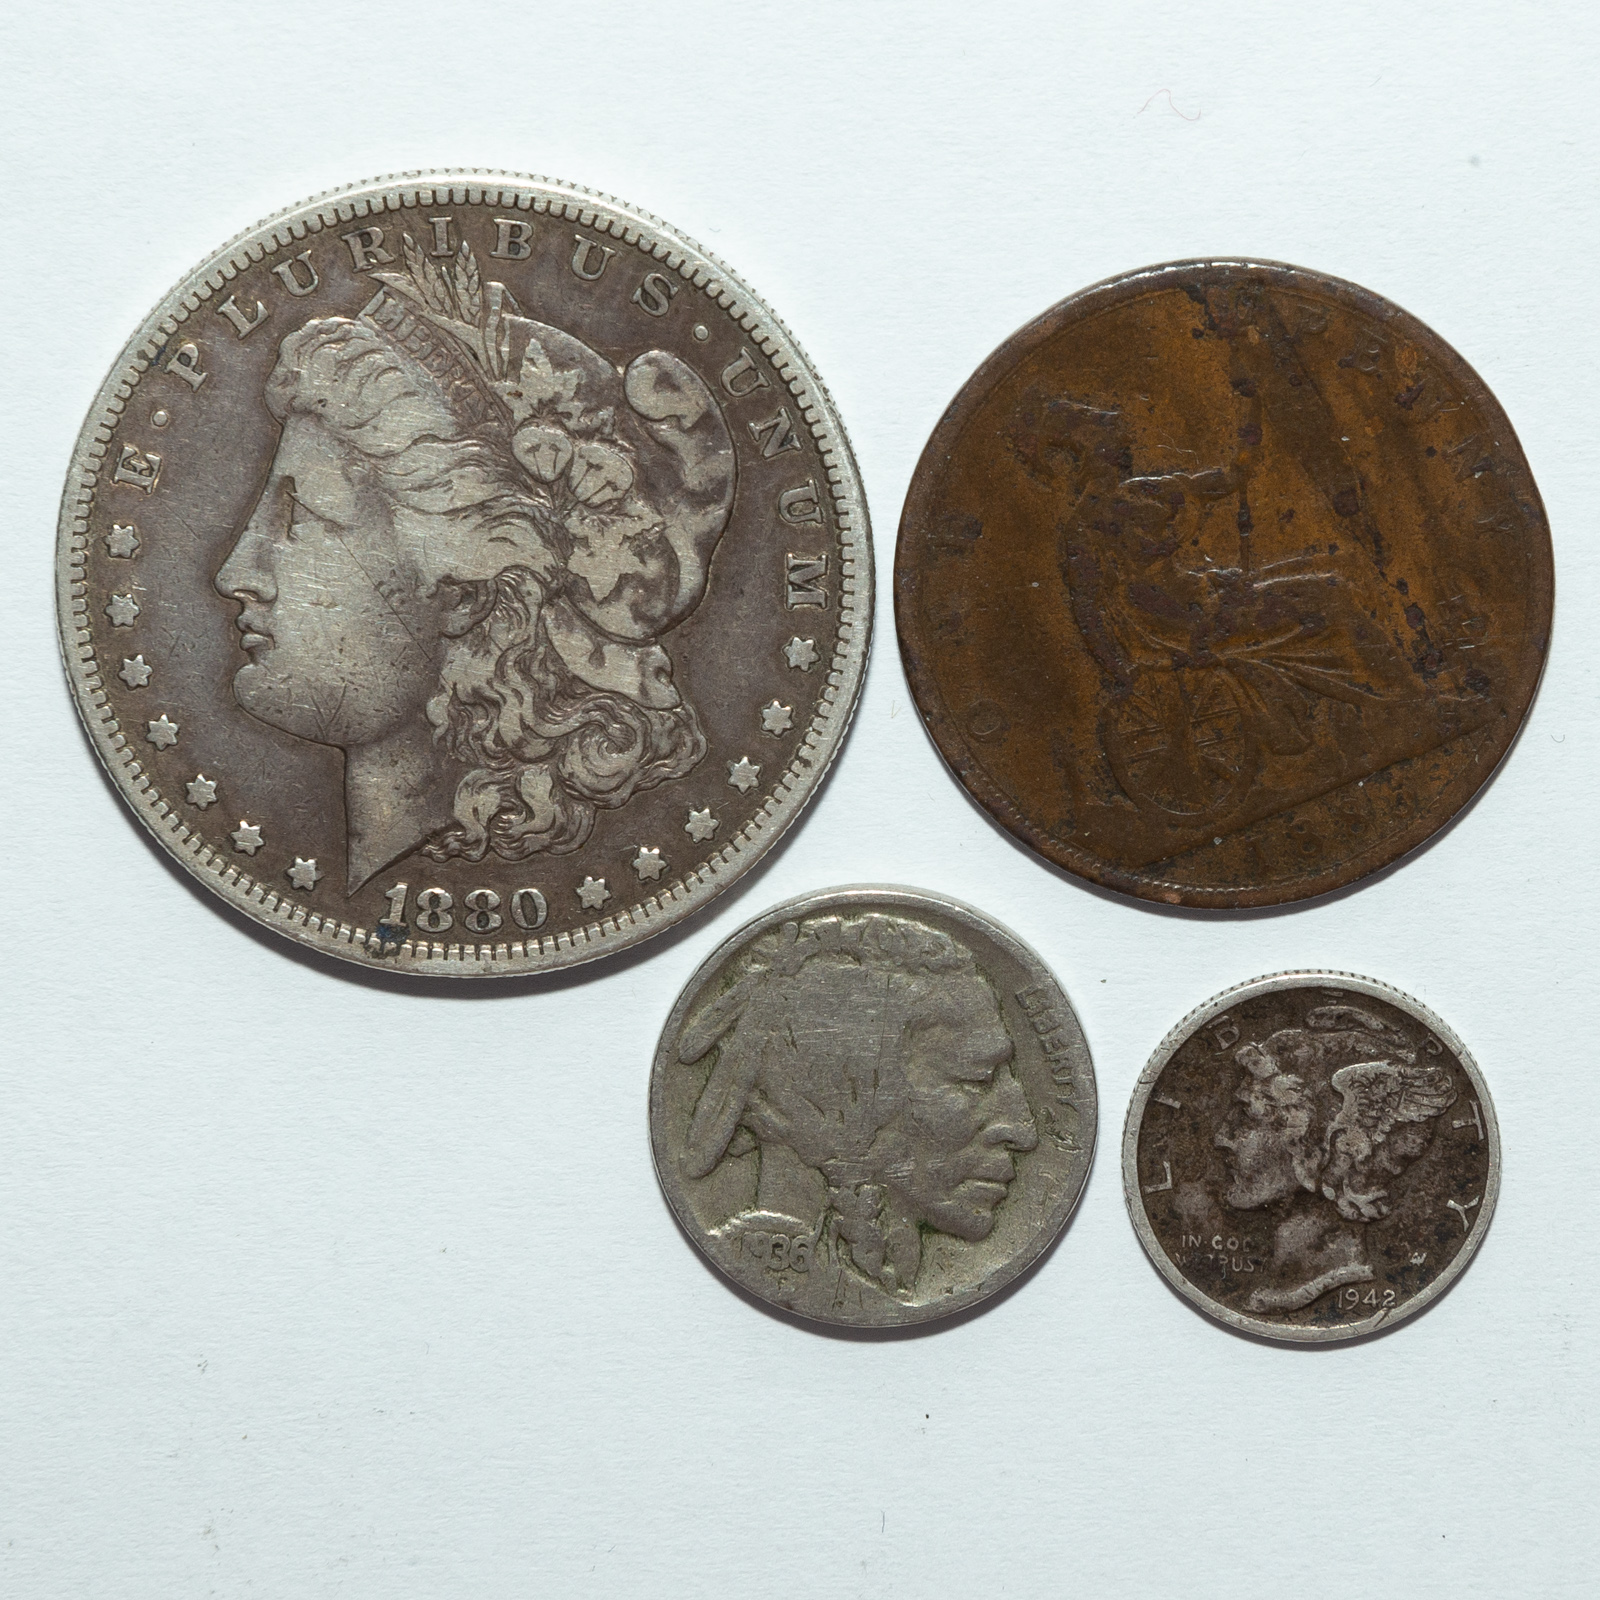 SMALL GROUP OF COINS WITH 1880-S